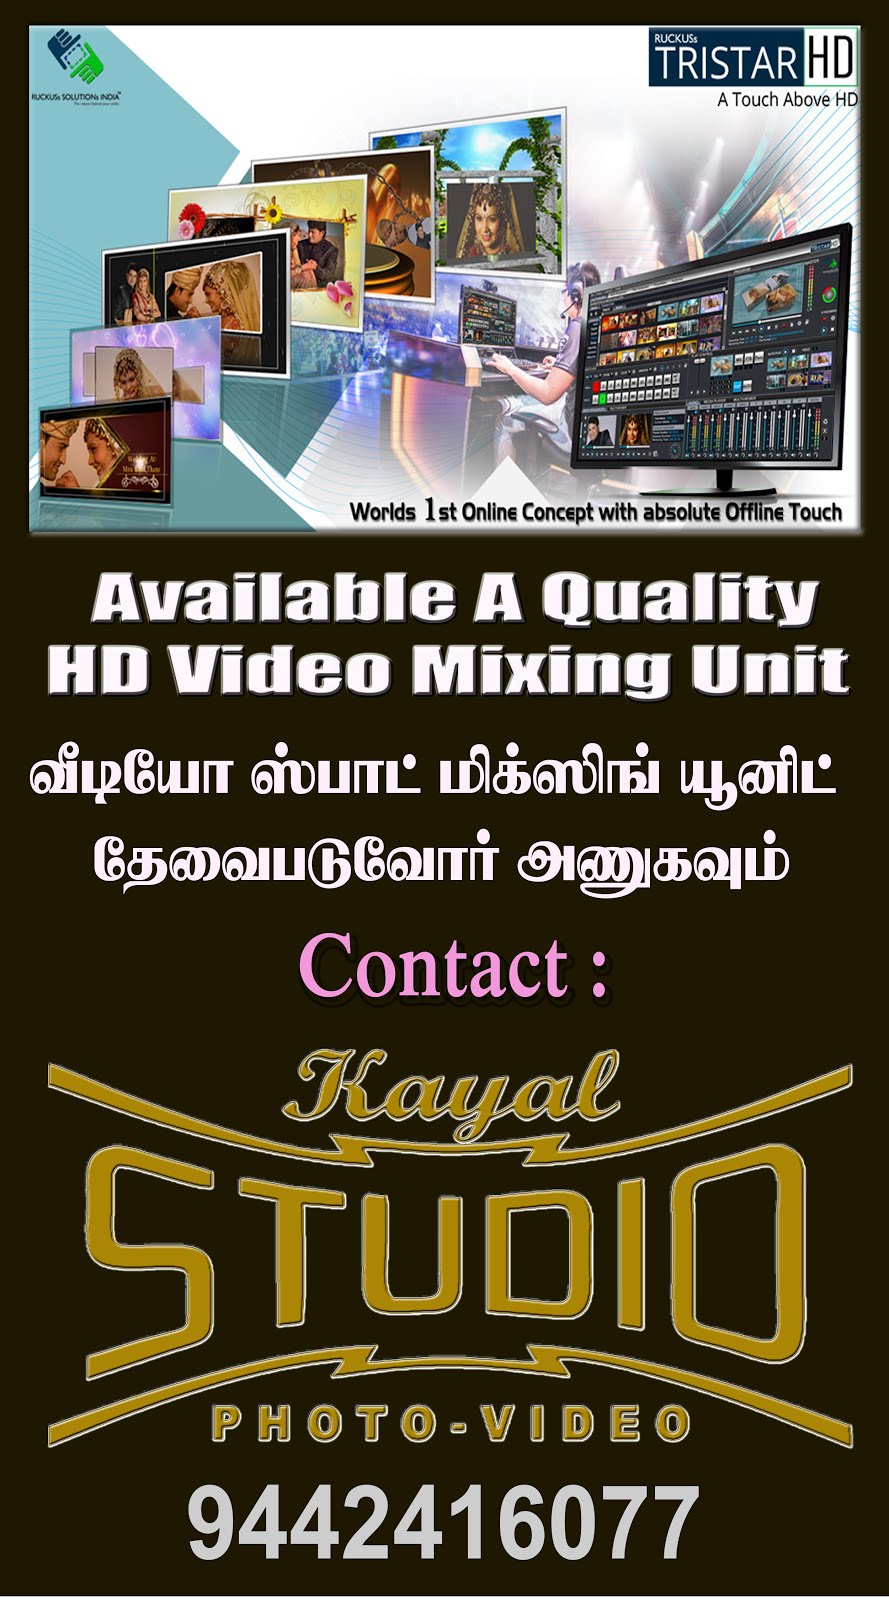 BEST QUALITY VIDEO MIXING UNIT